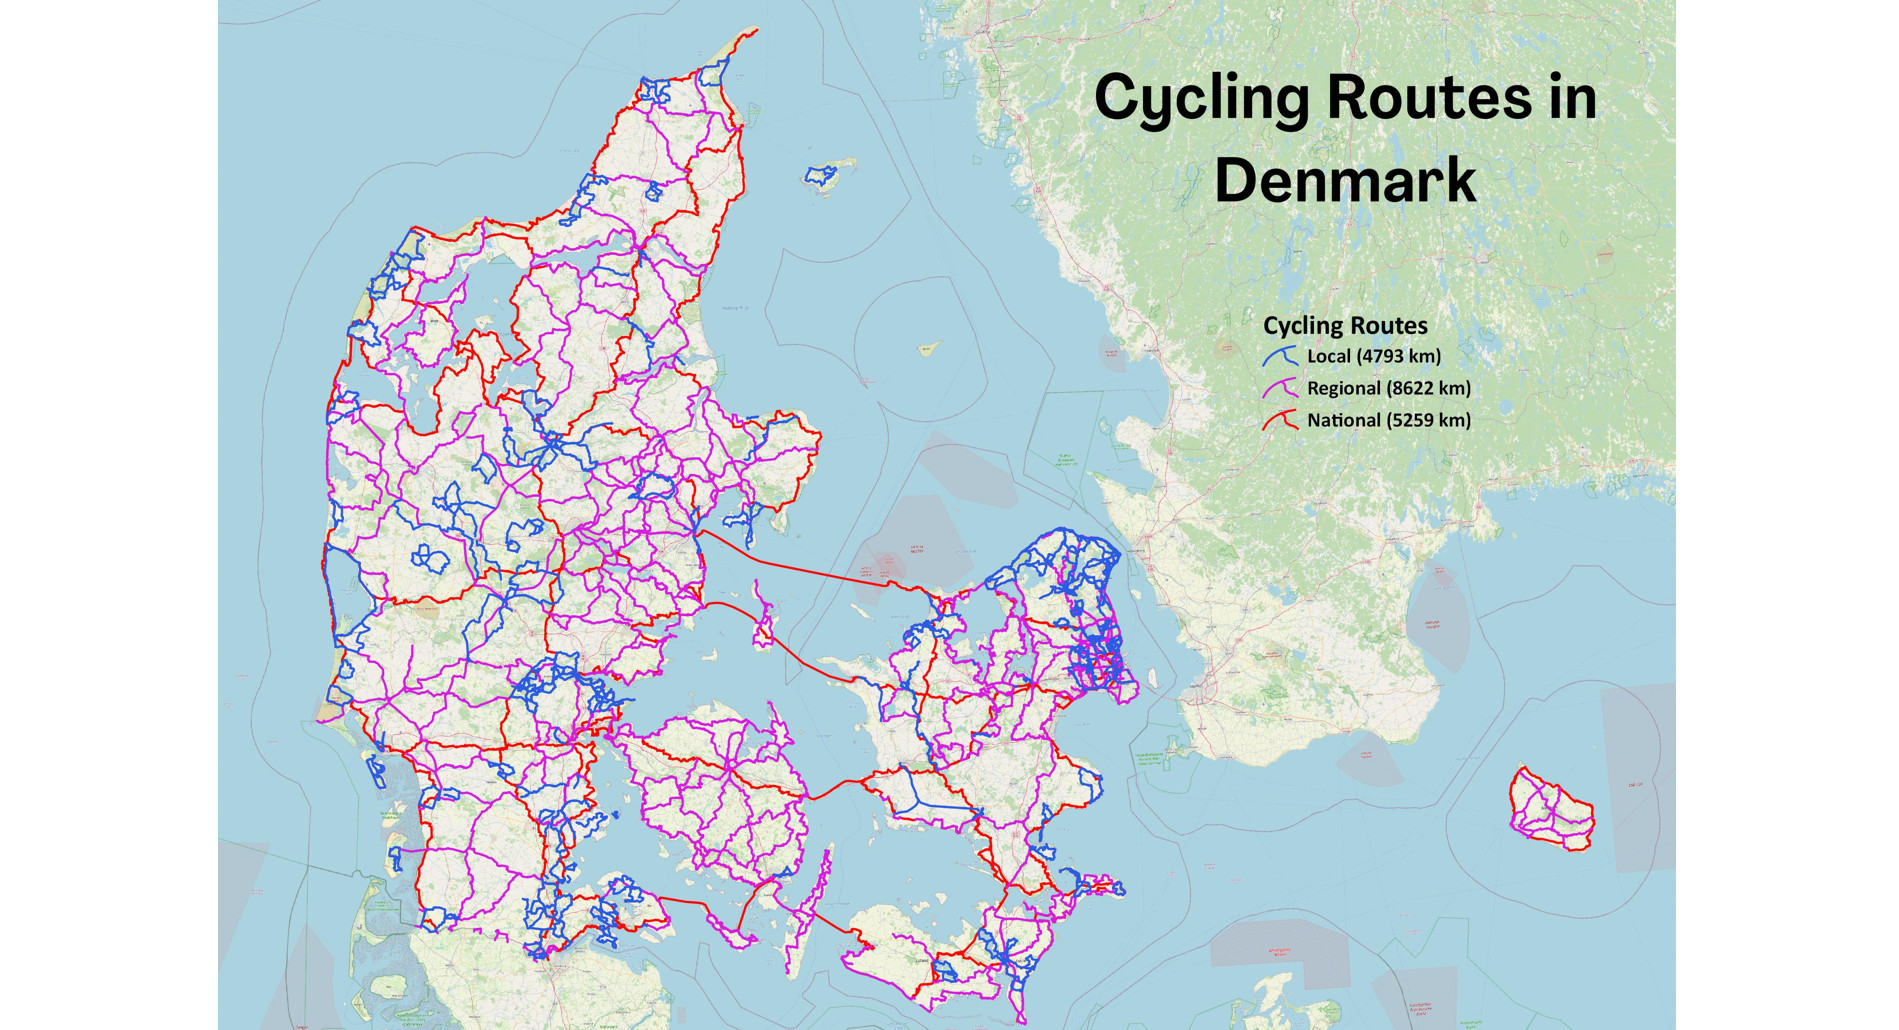 Cycling routes in Denmark